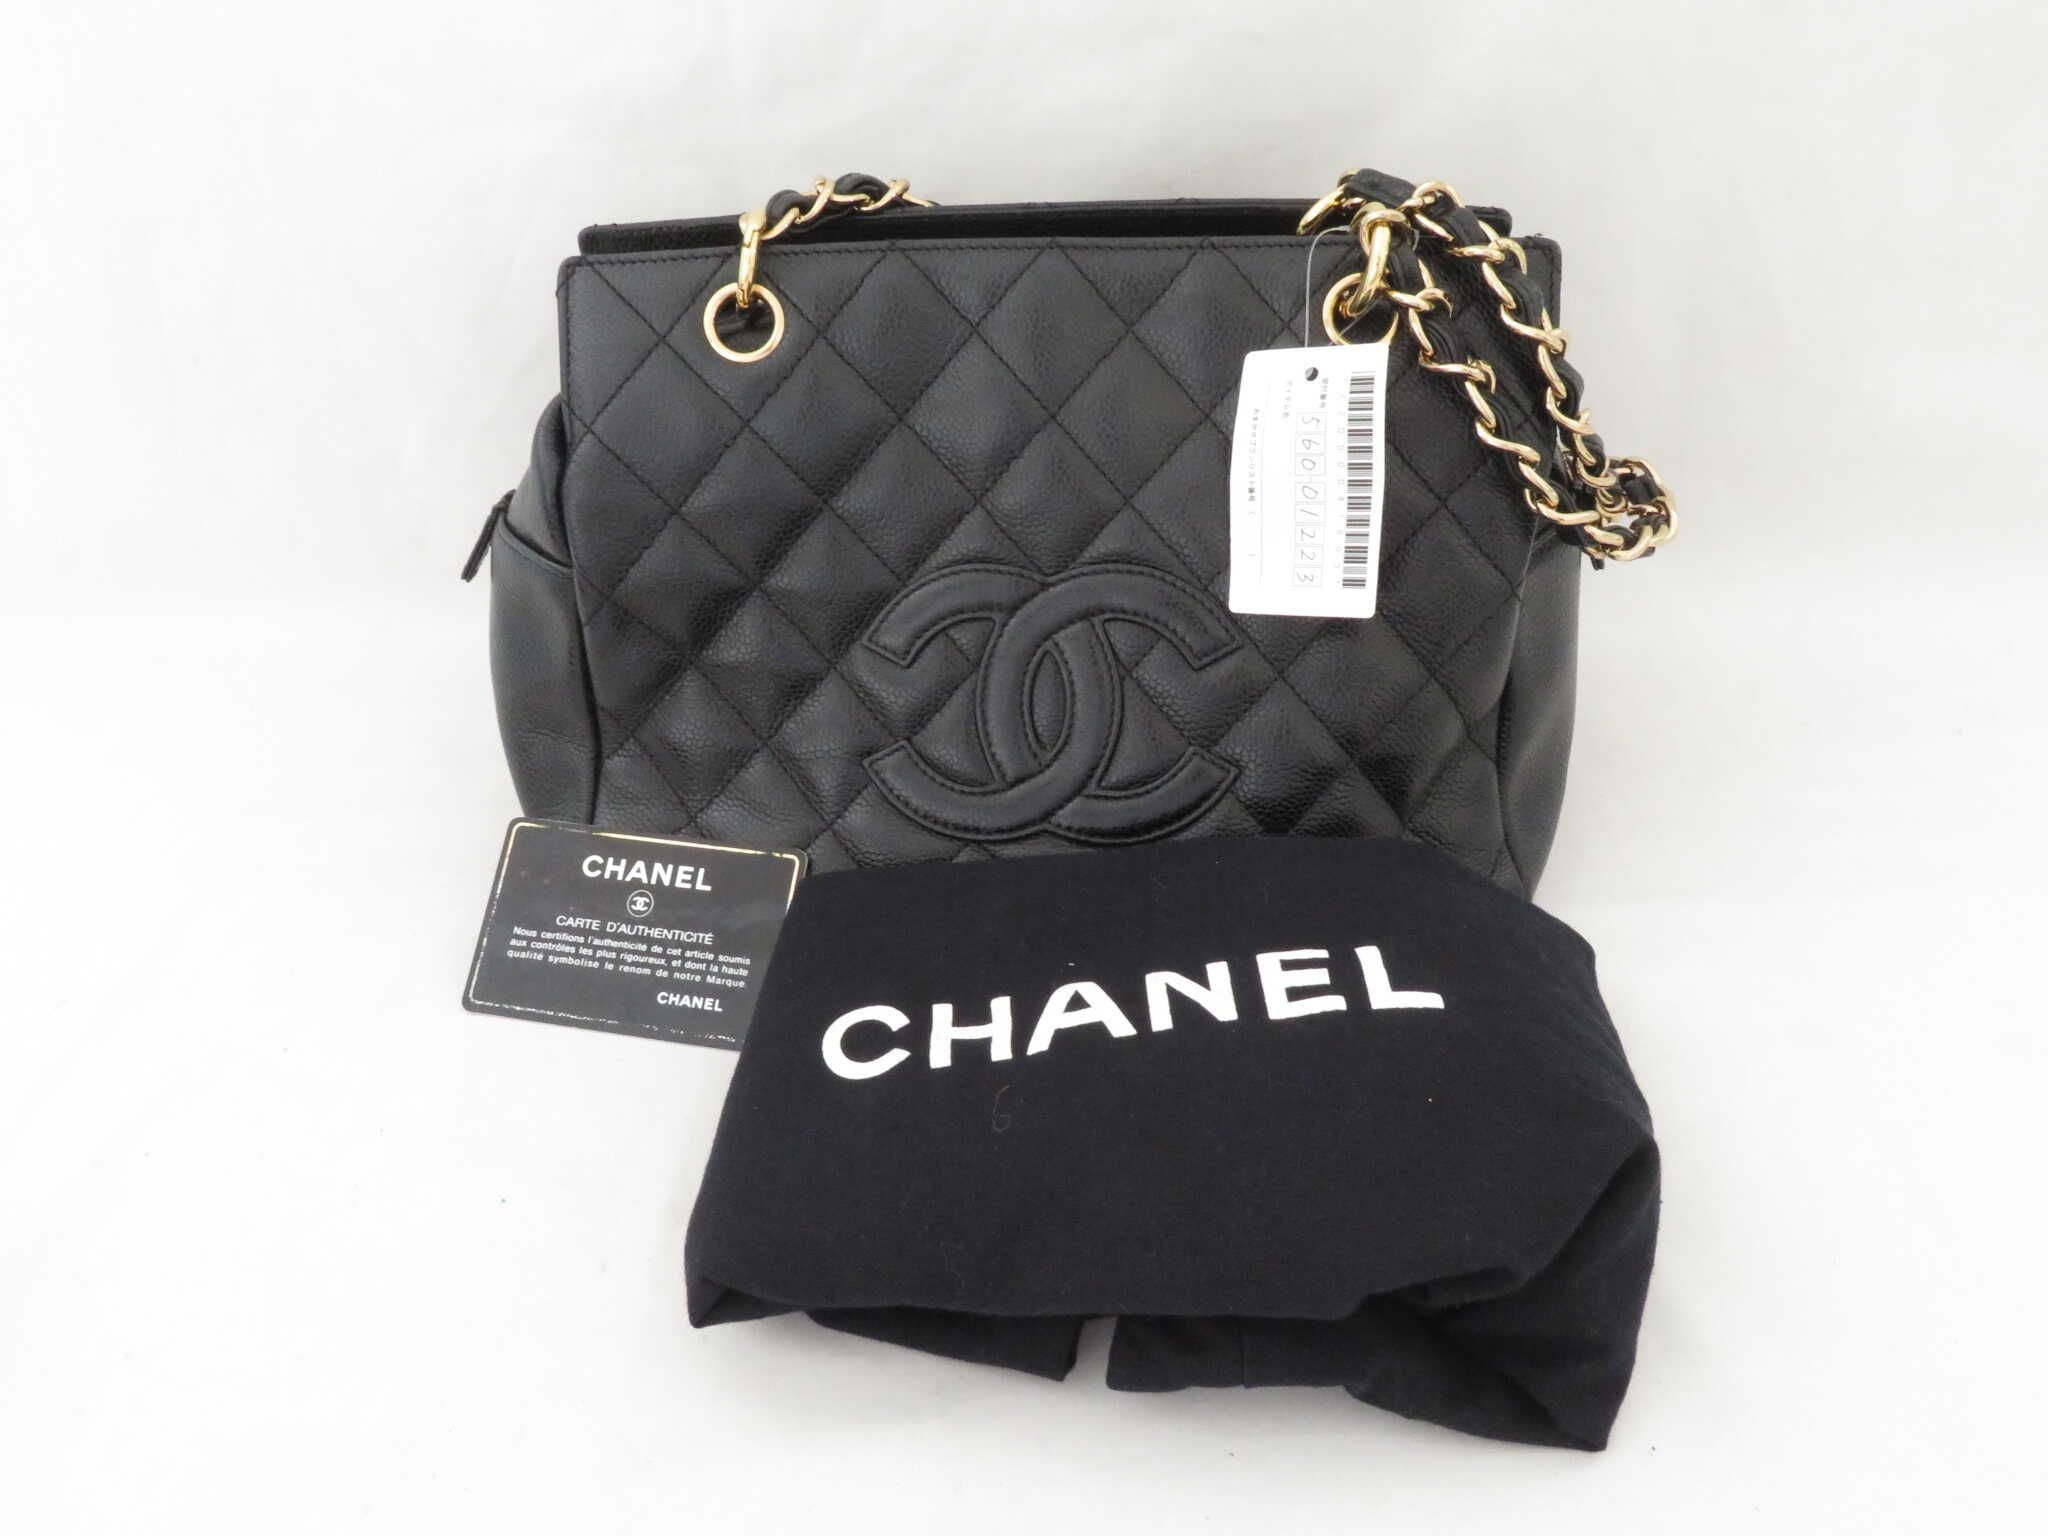 Chanel Off White Quilted Caviar Leather Timeless Shopper Tote